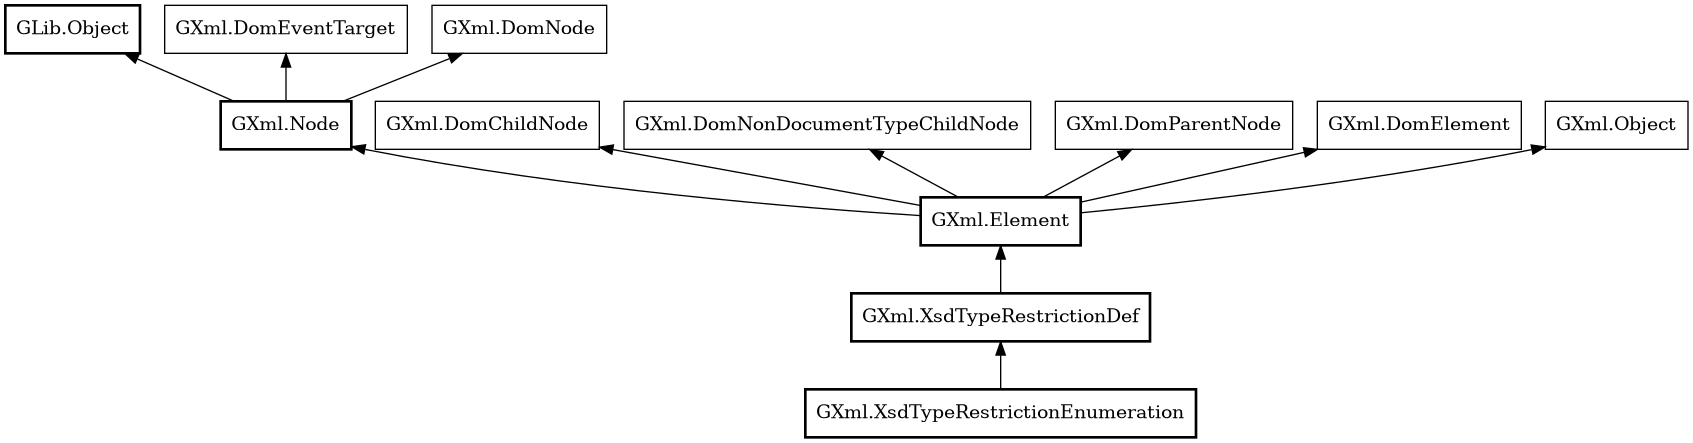 Object hierarchy for XsdTypeRestrictionEnumeration